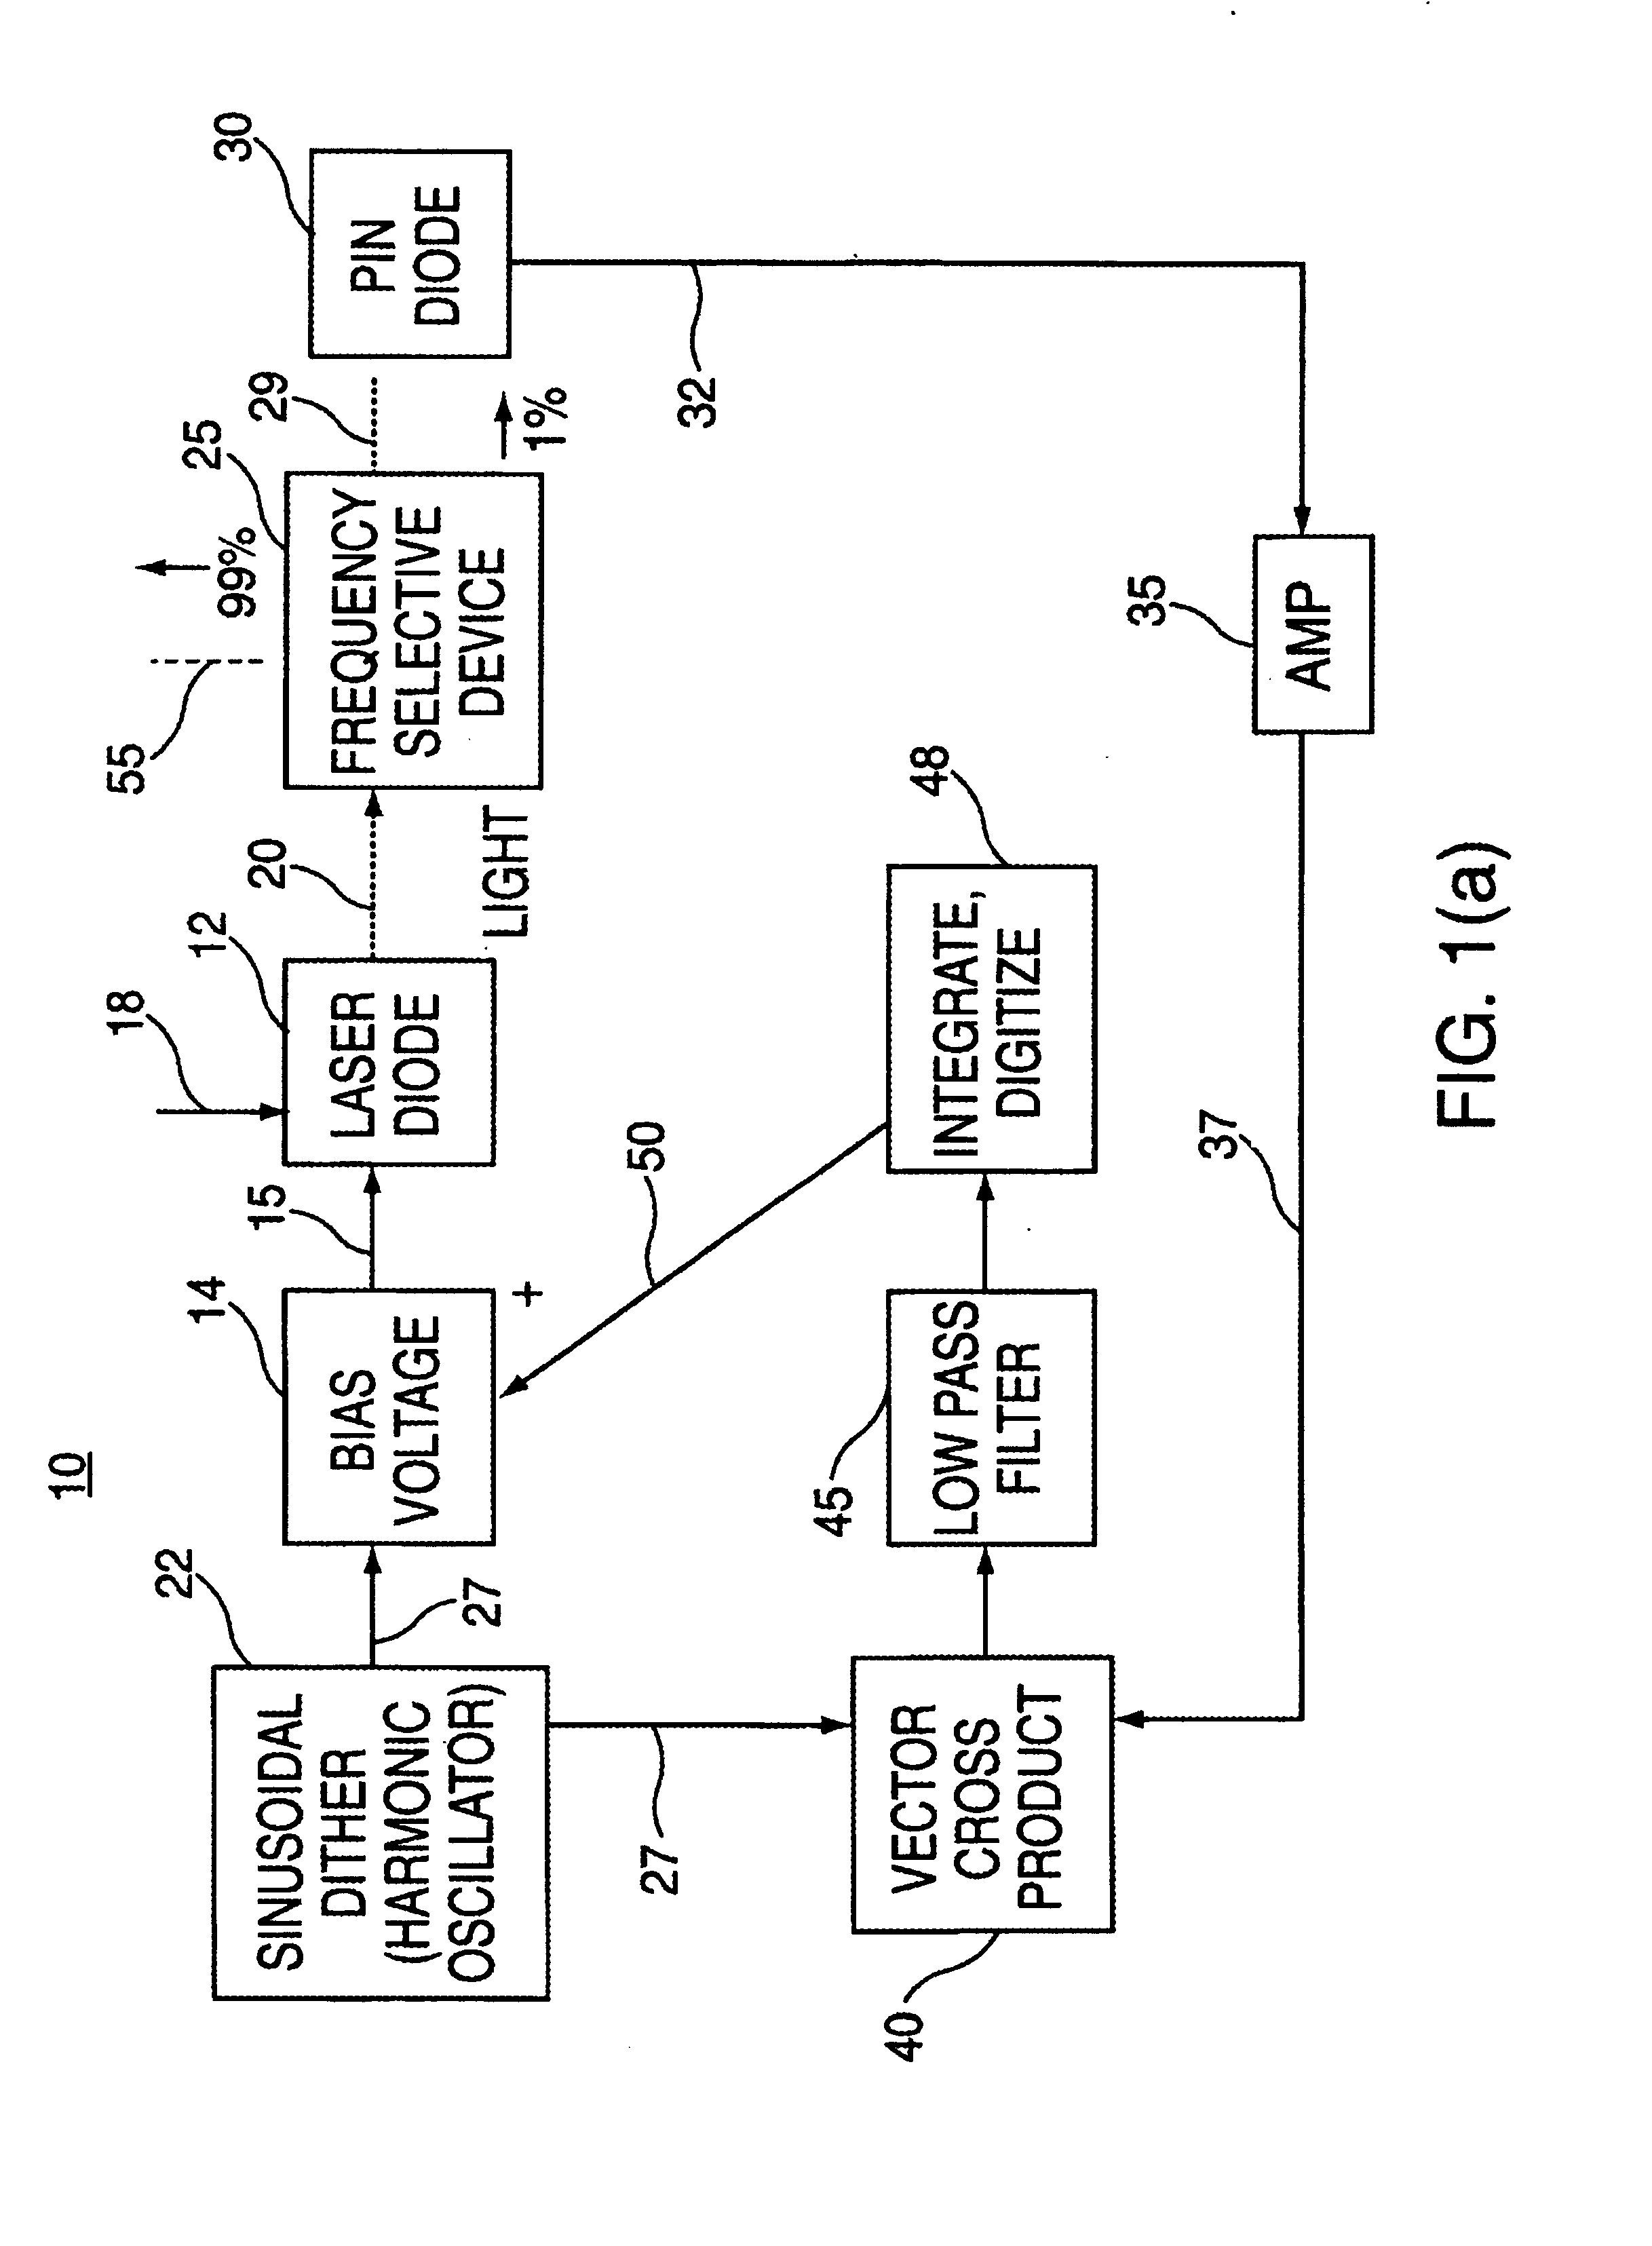 Apparatus and method for wavelength-locked loops for systems and applications employing electromagnetic signals